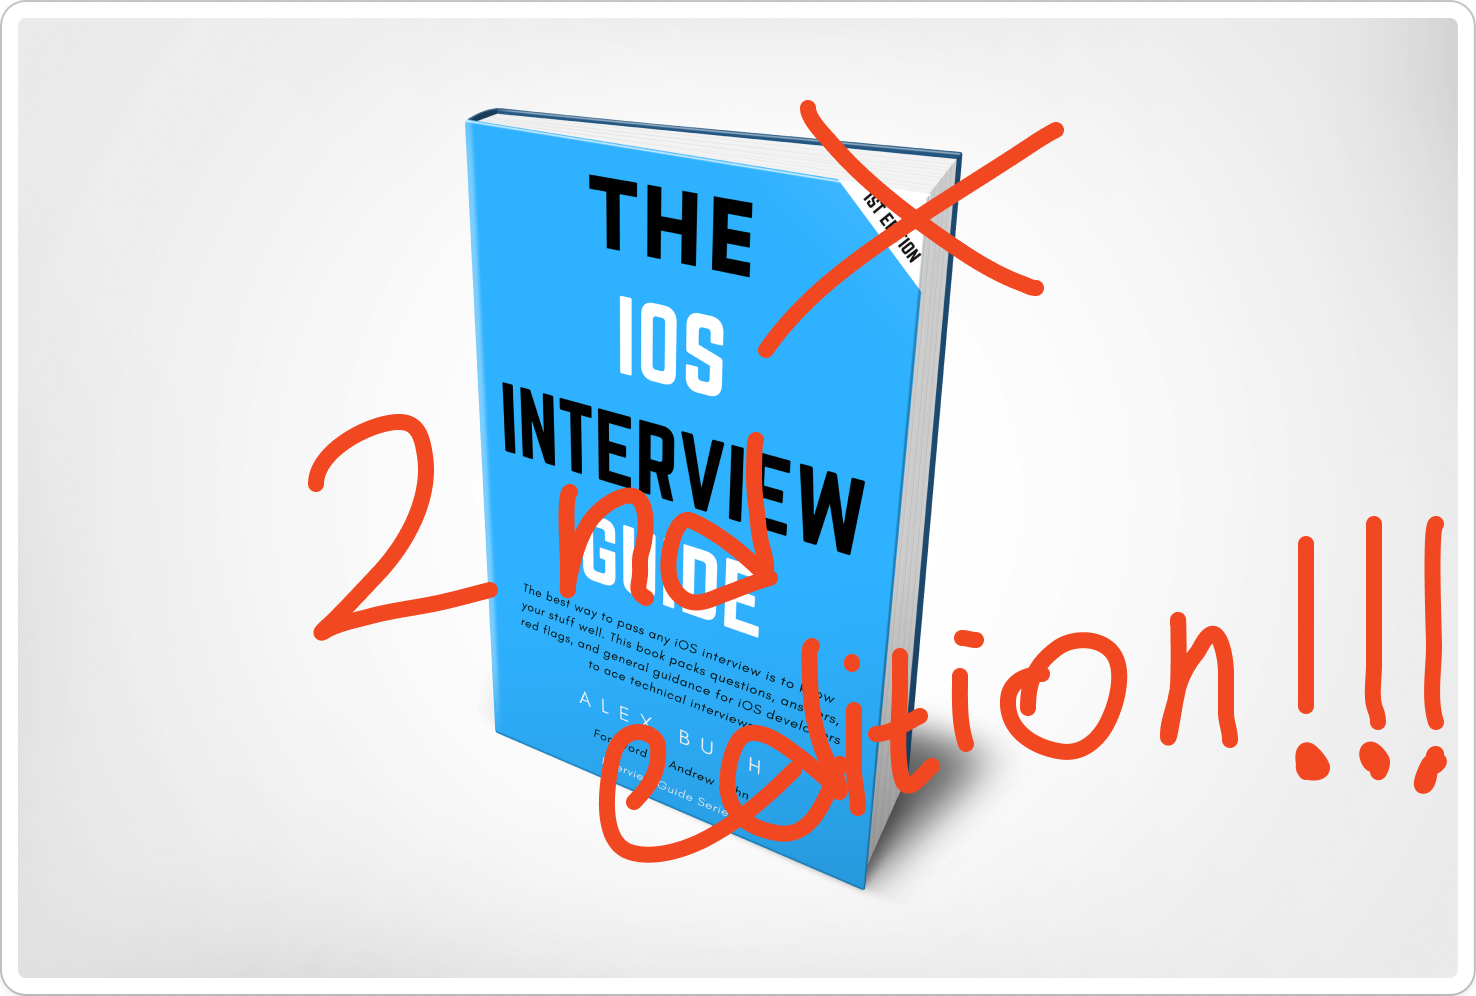 The iOS Interview Guide 2nd Edition Book Cover